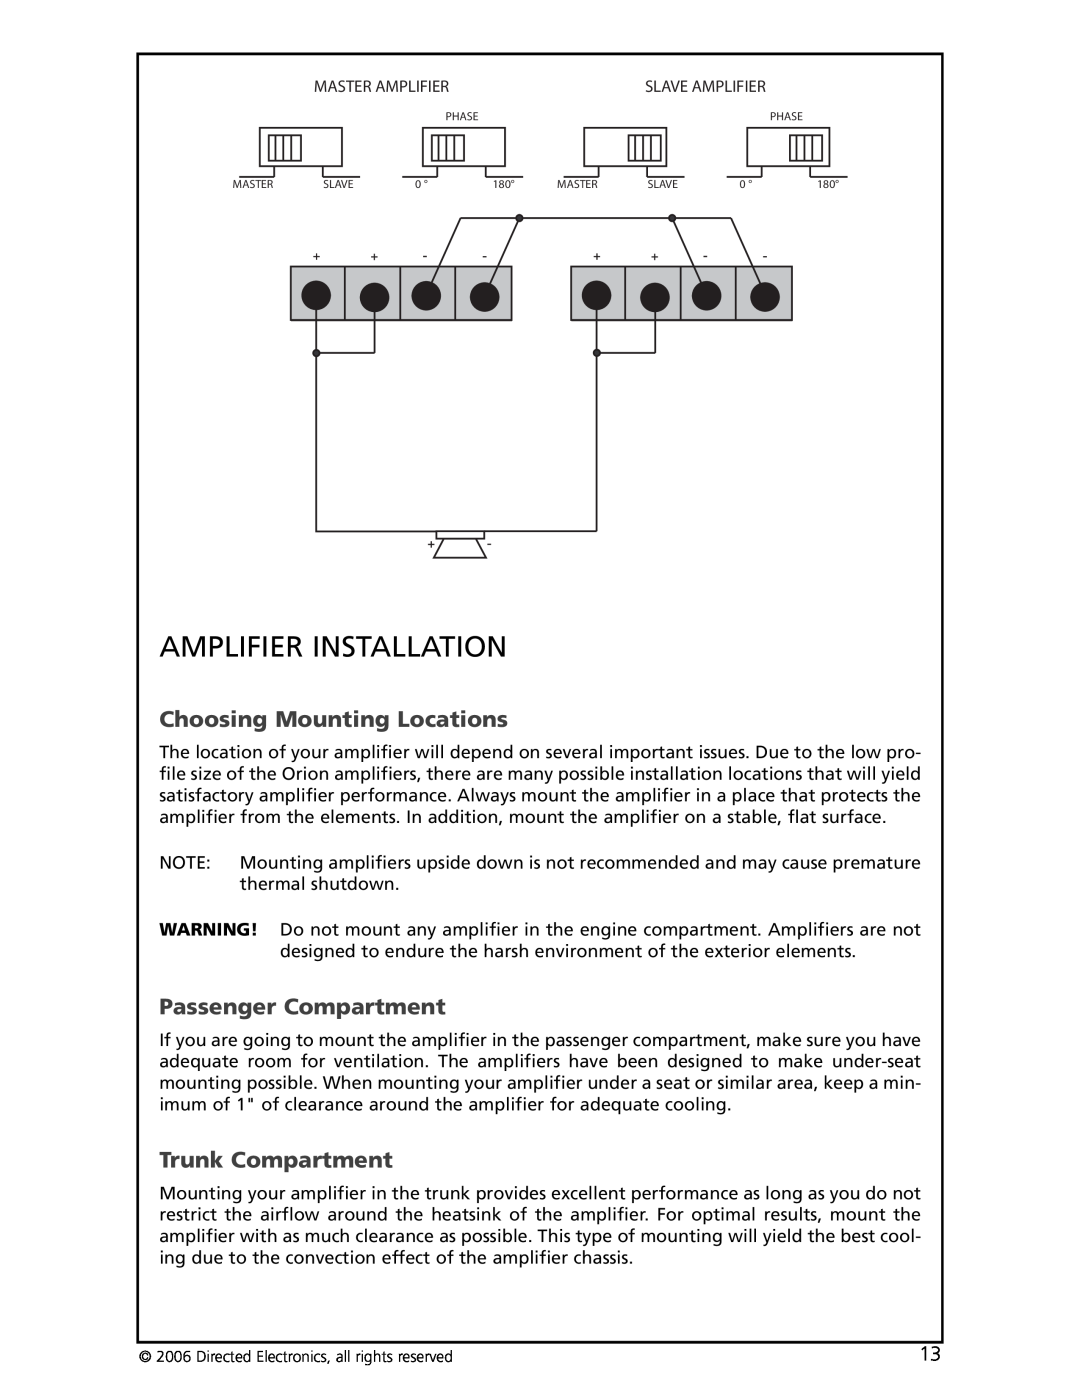 Directed Electronics HCCA-D1200 warranty Amplifier Installation, Choosing Mounting Locations, Passenger Compartment 